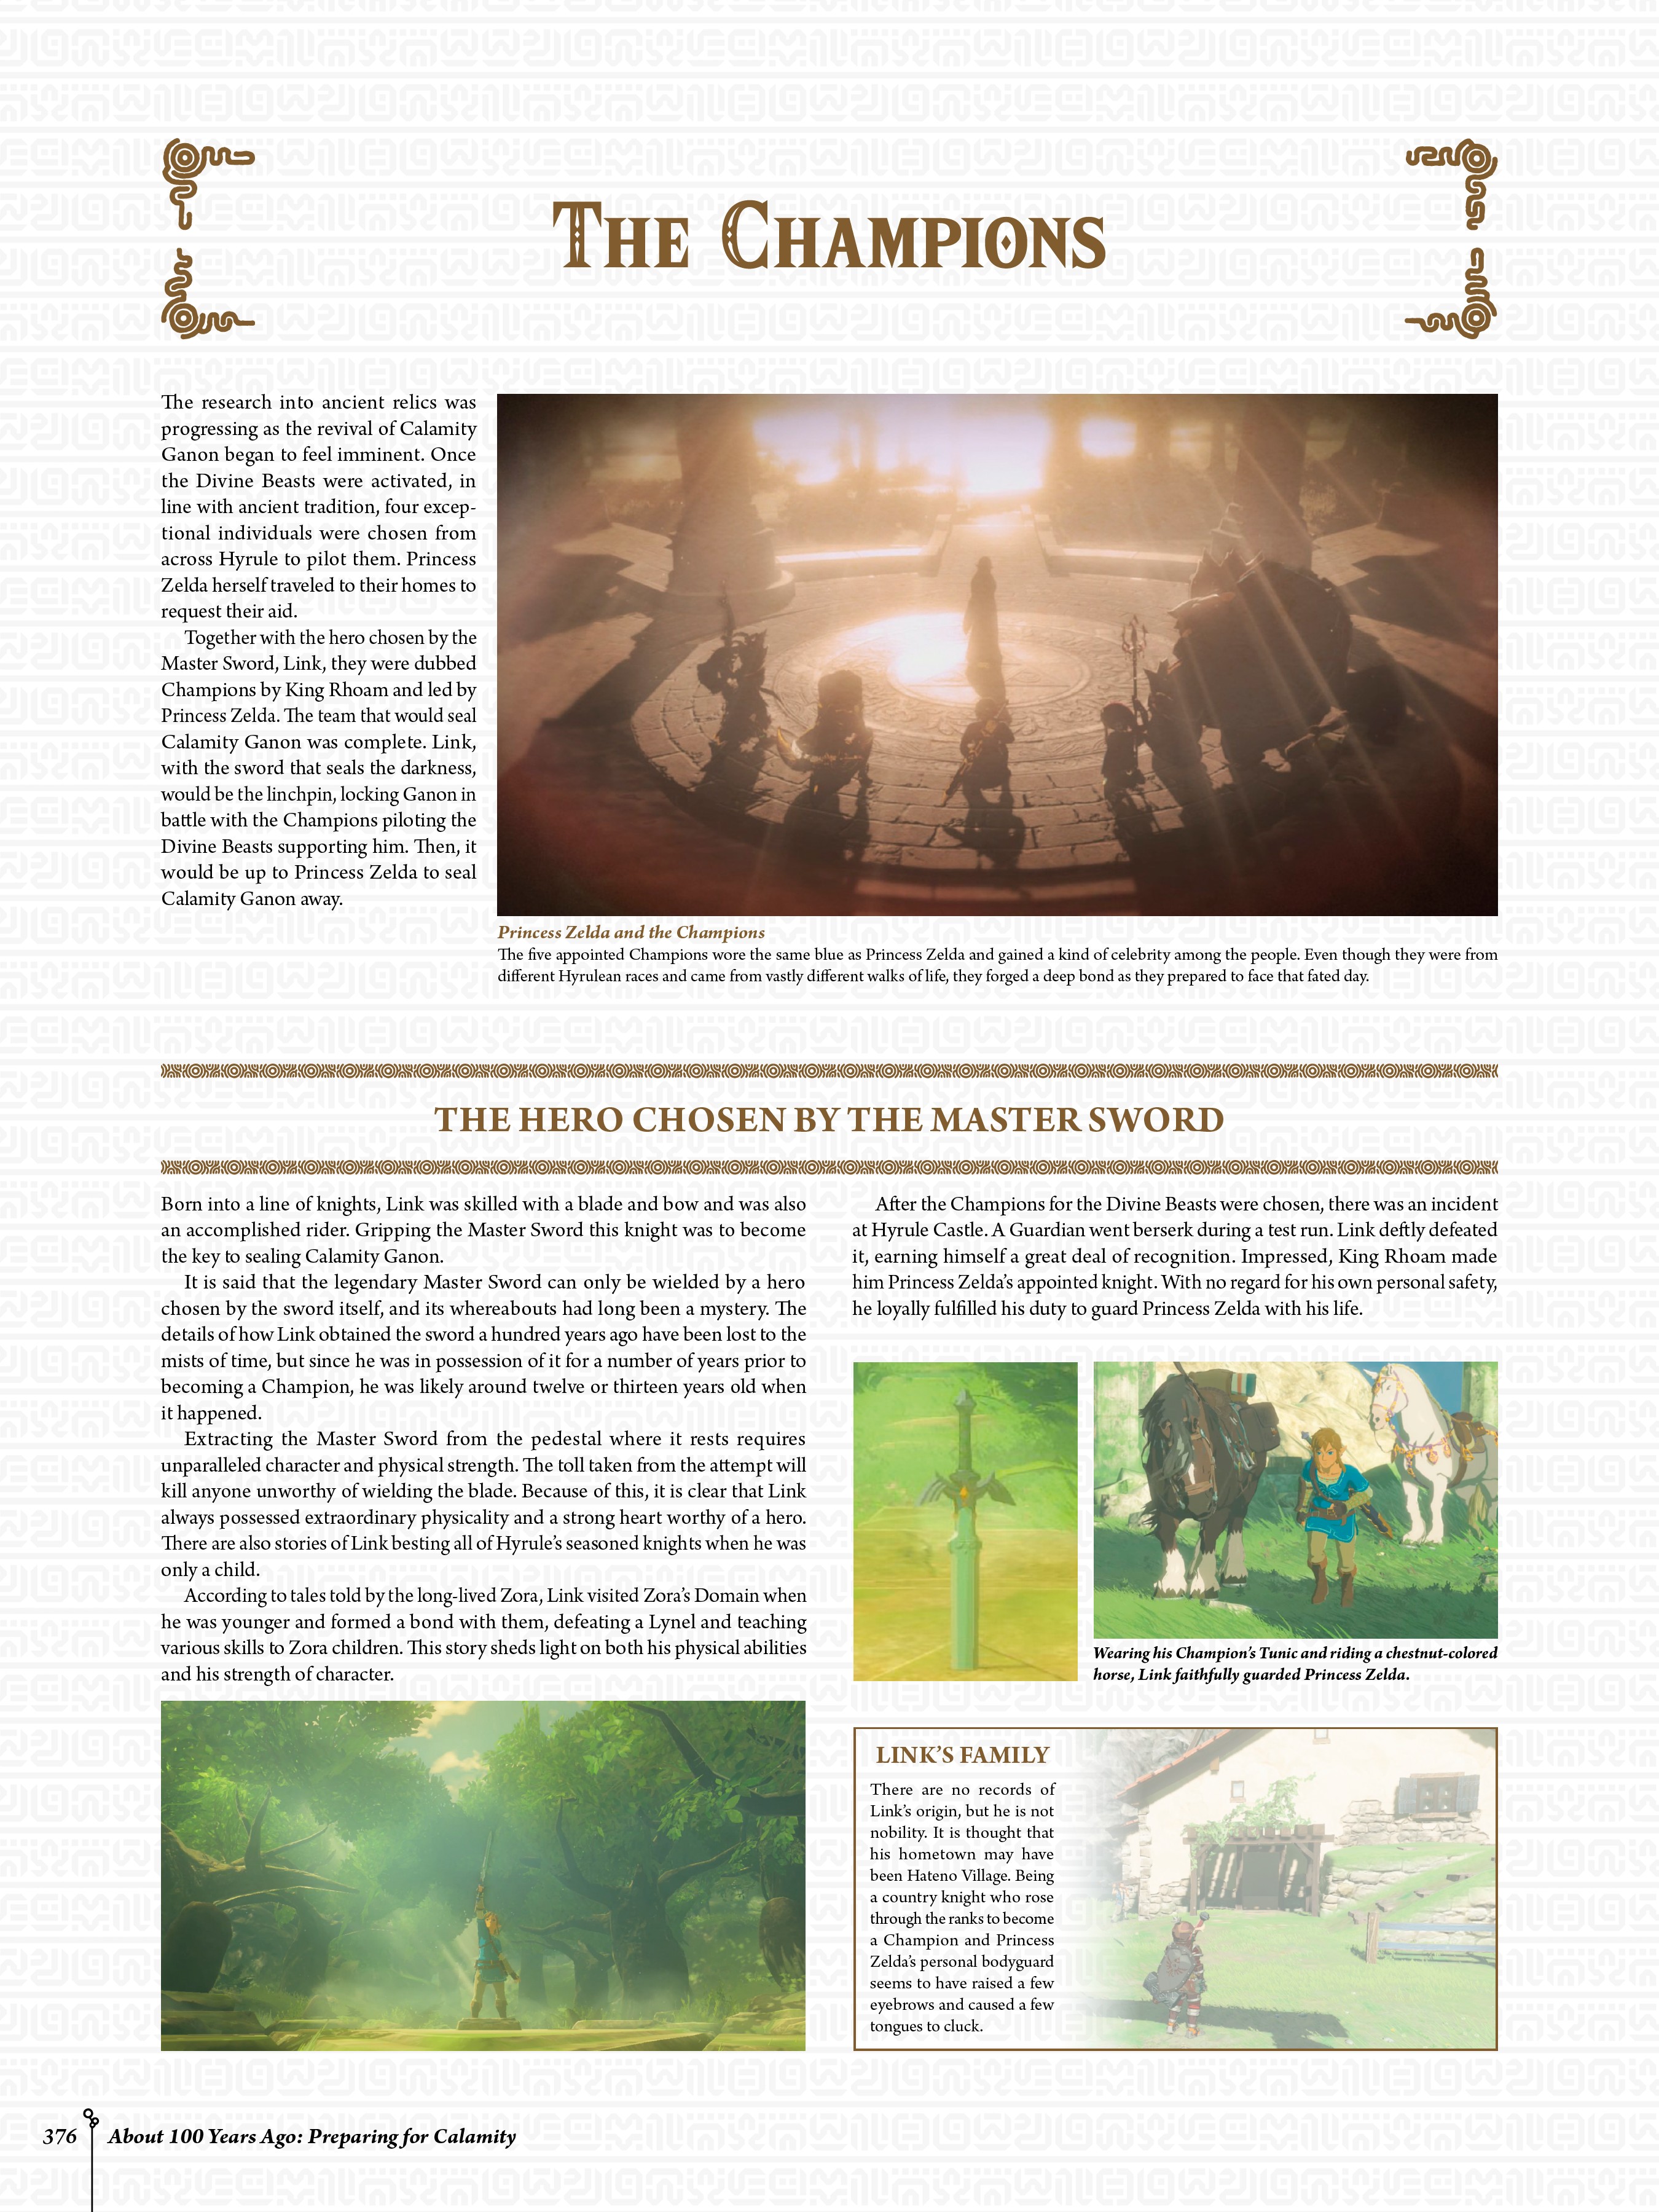 Read online The Legend of Zelda: Breath of the Wild–Creating A Champion comic -  Issue # TPB (Part 4) - 18